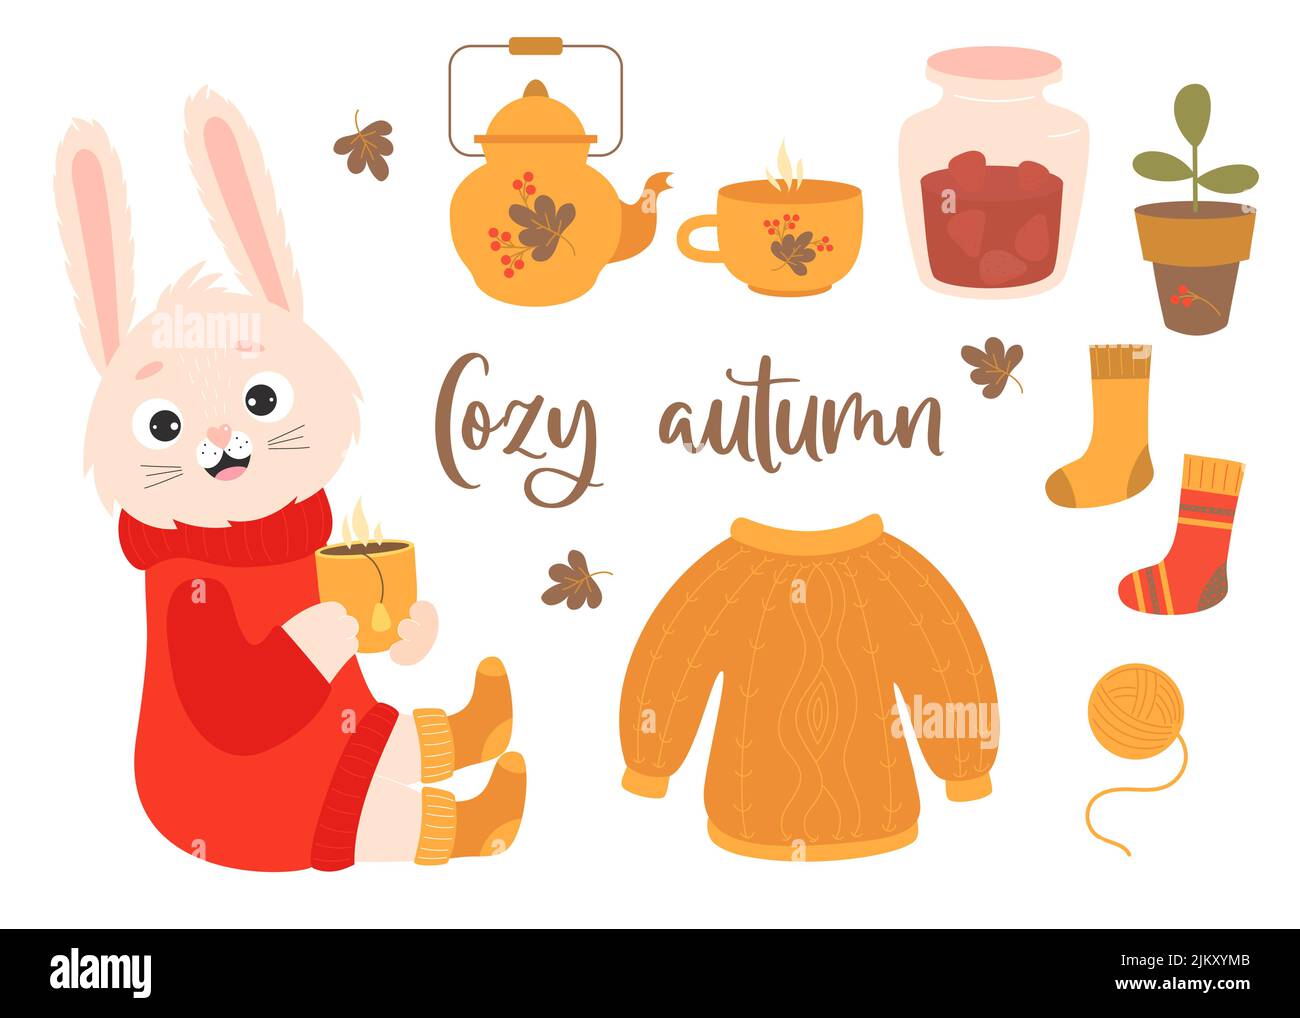 Character cute rabbit in a ceramic tea kettle Vector Image